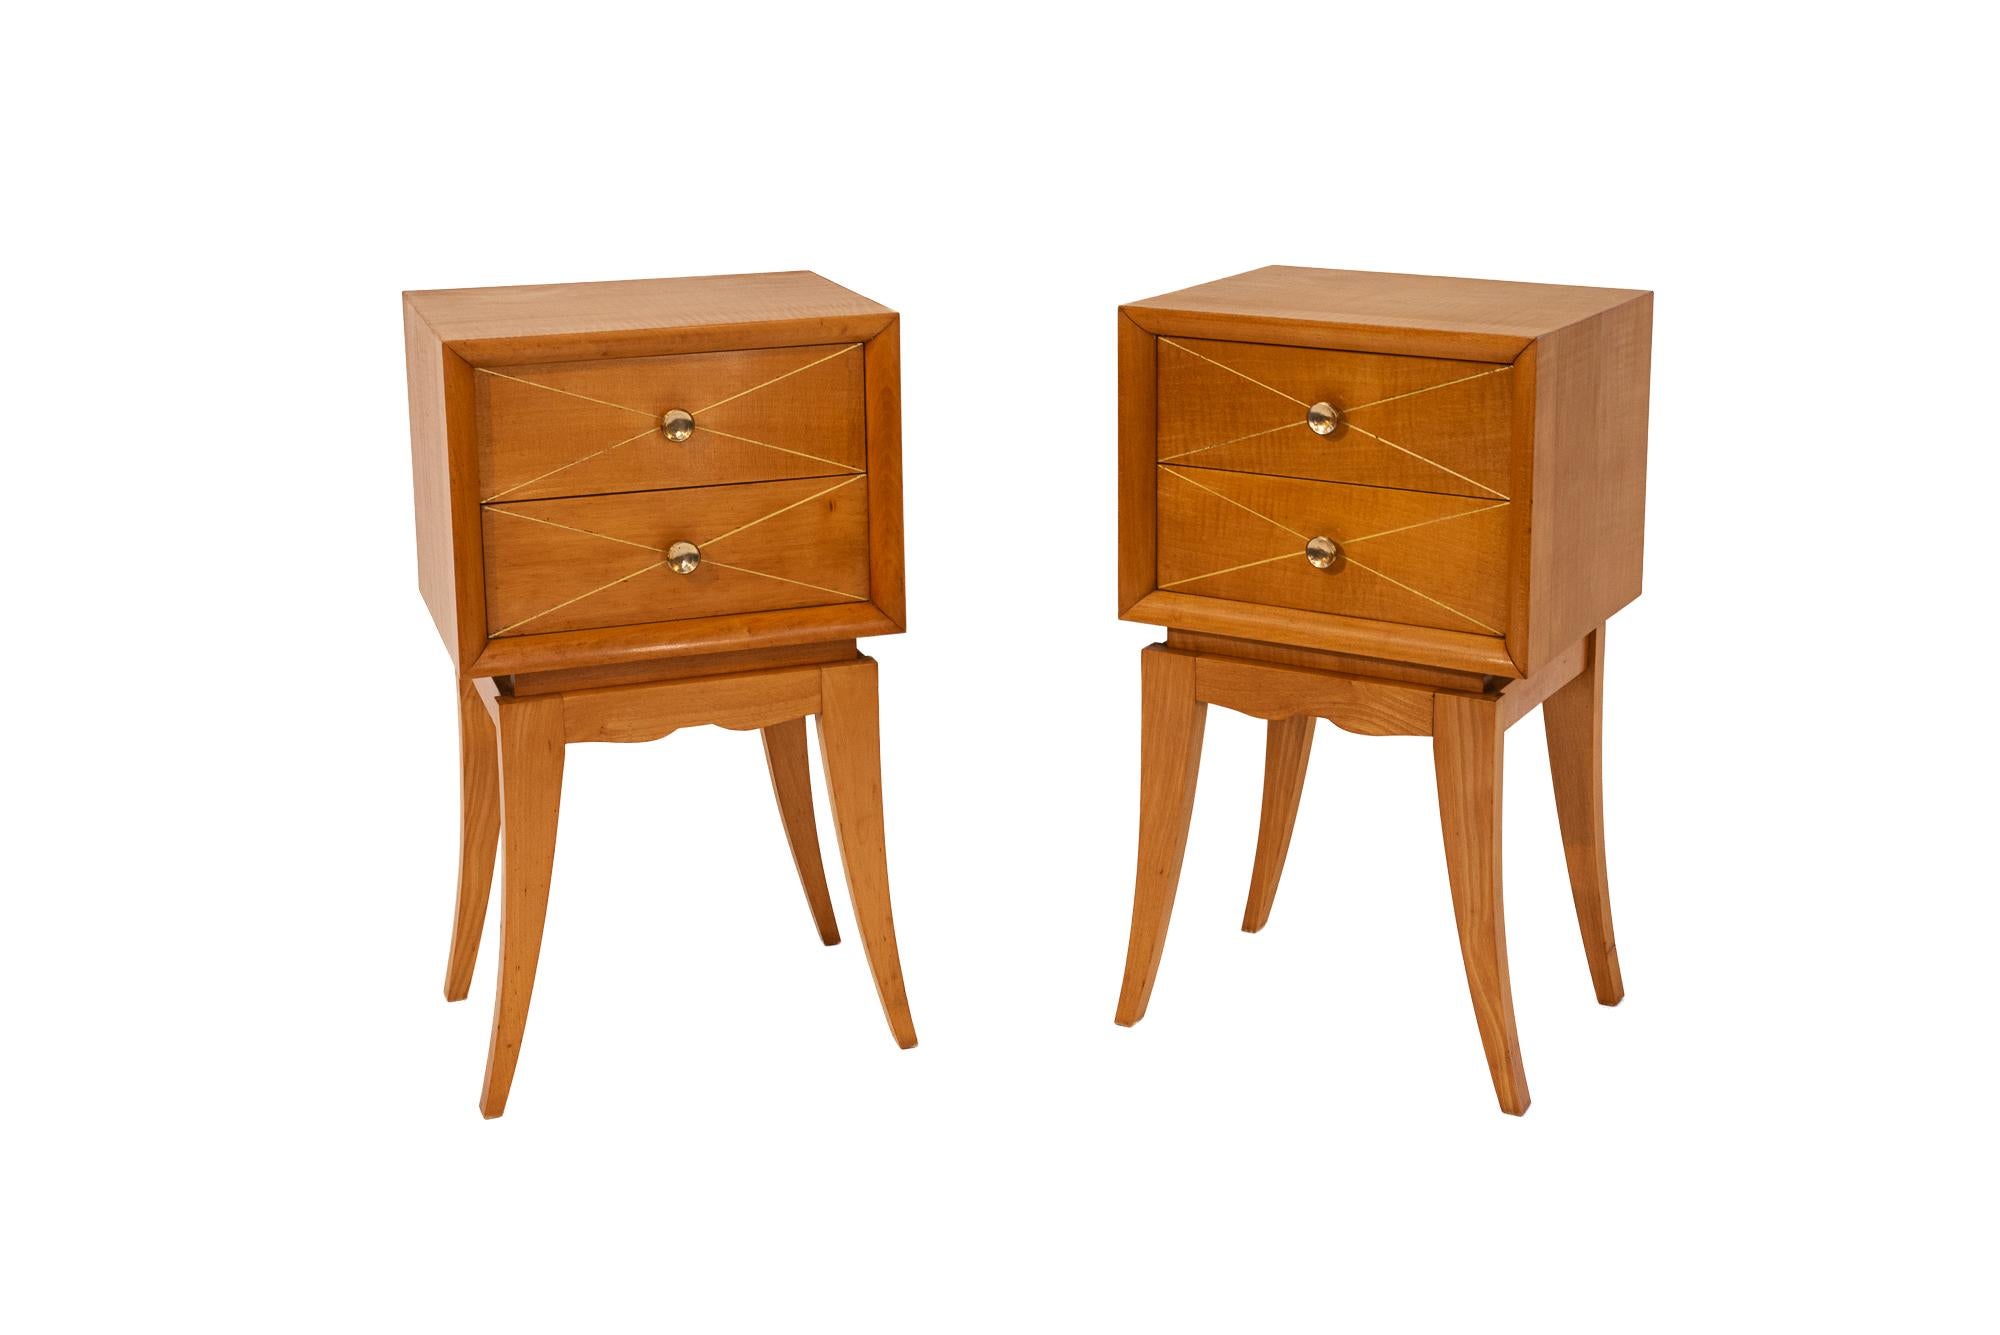 Pair of nightstands by Suzanne Guiguichon,
wood,
circa 1970, France.
Measures: Height 58 cm, width 33 cm, depth 27 cm.
       